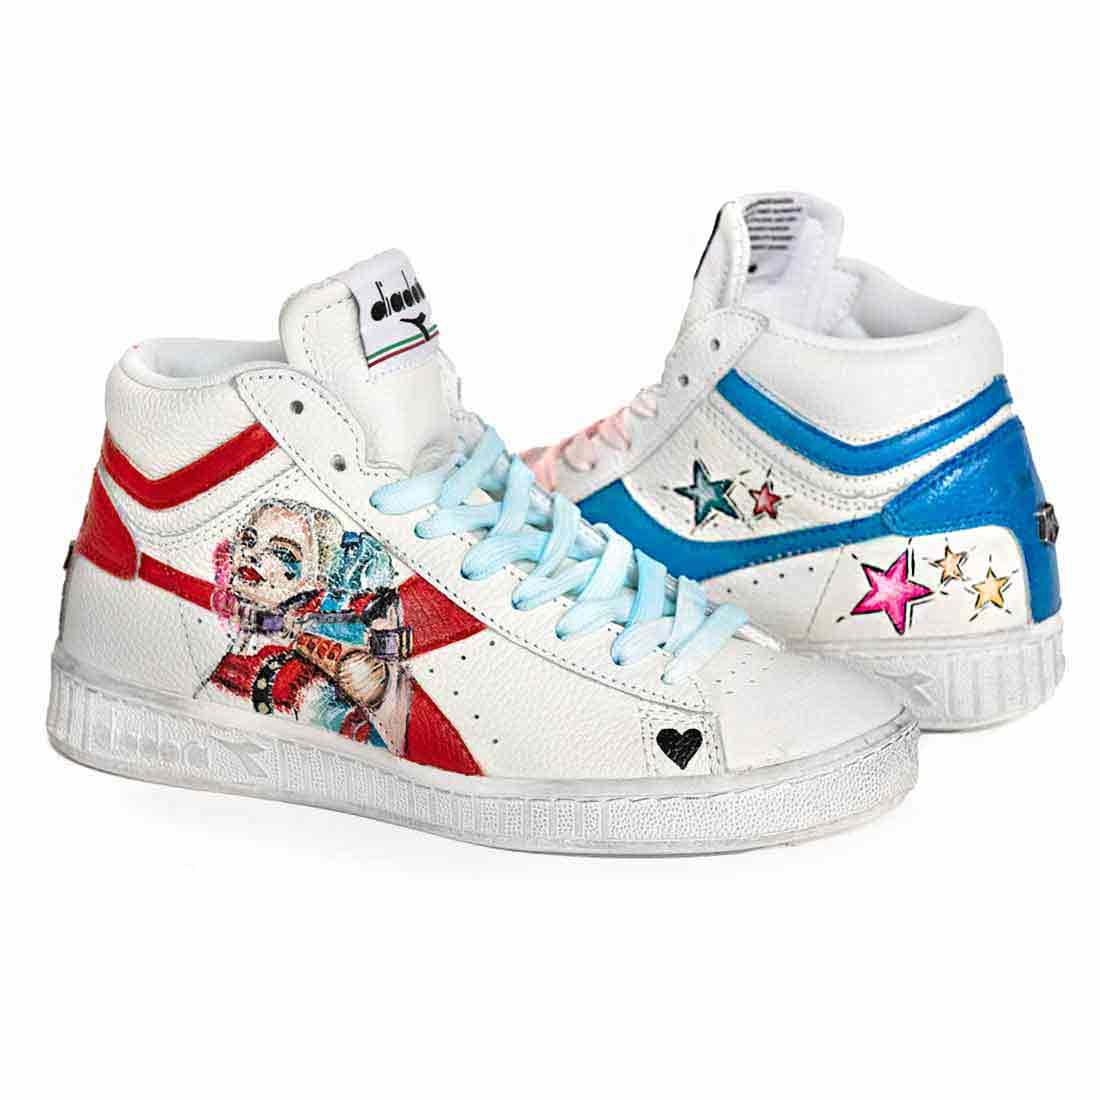 sneakers harley quinn cosplay limited edition